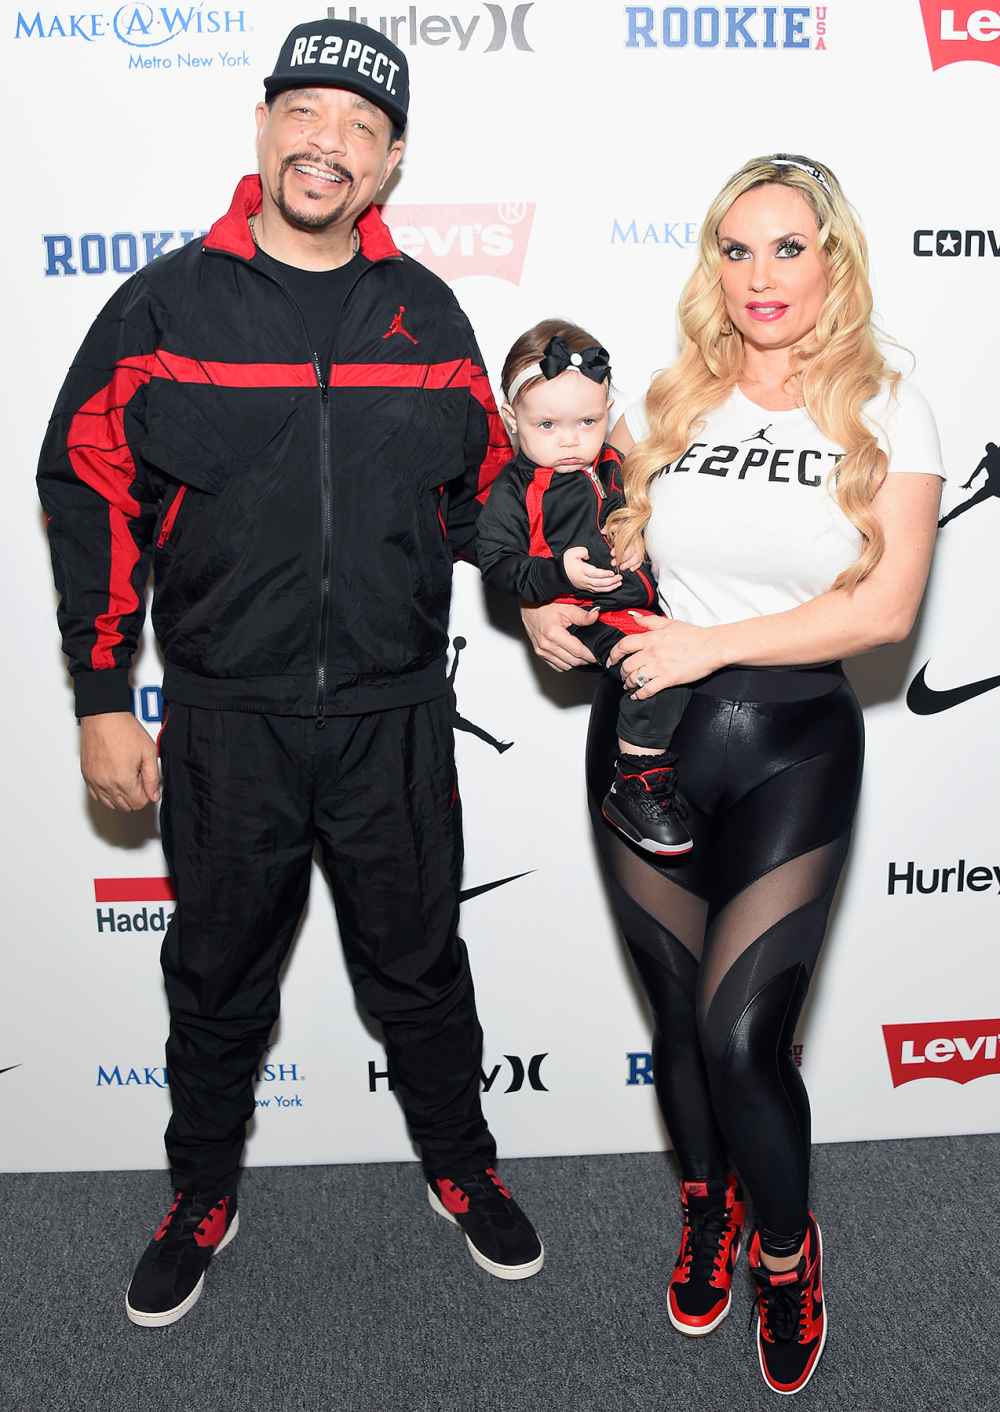 Ice-T, Chanel Nicole Marrow, and Coco Austin pose backstage at the Rookie USA fashion show during New York Fashion Week: The Shows at Gallery 3, Skylight Clarkson Sq on February 15, 2017 in New York City.